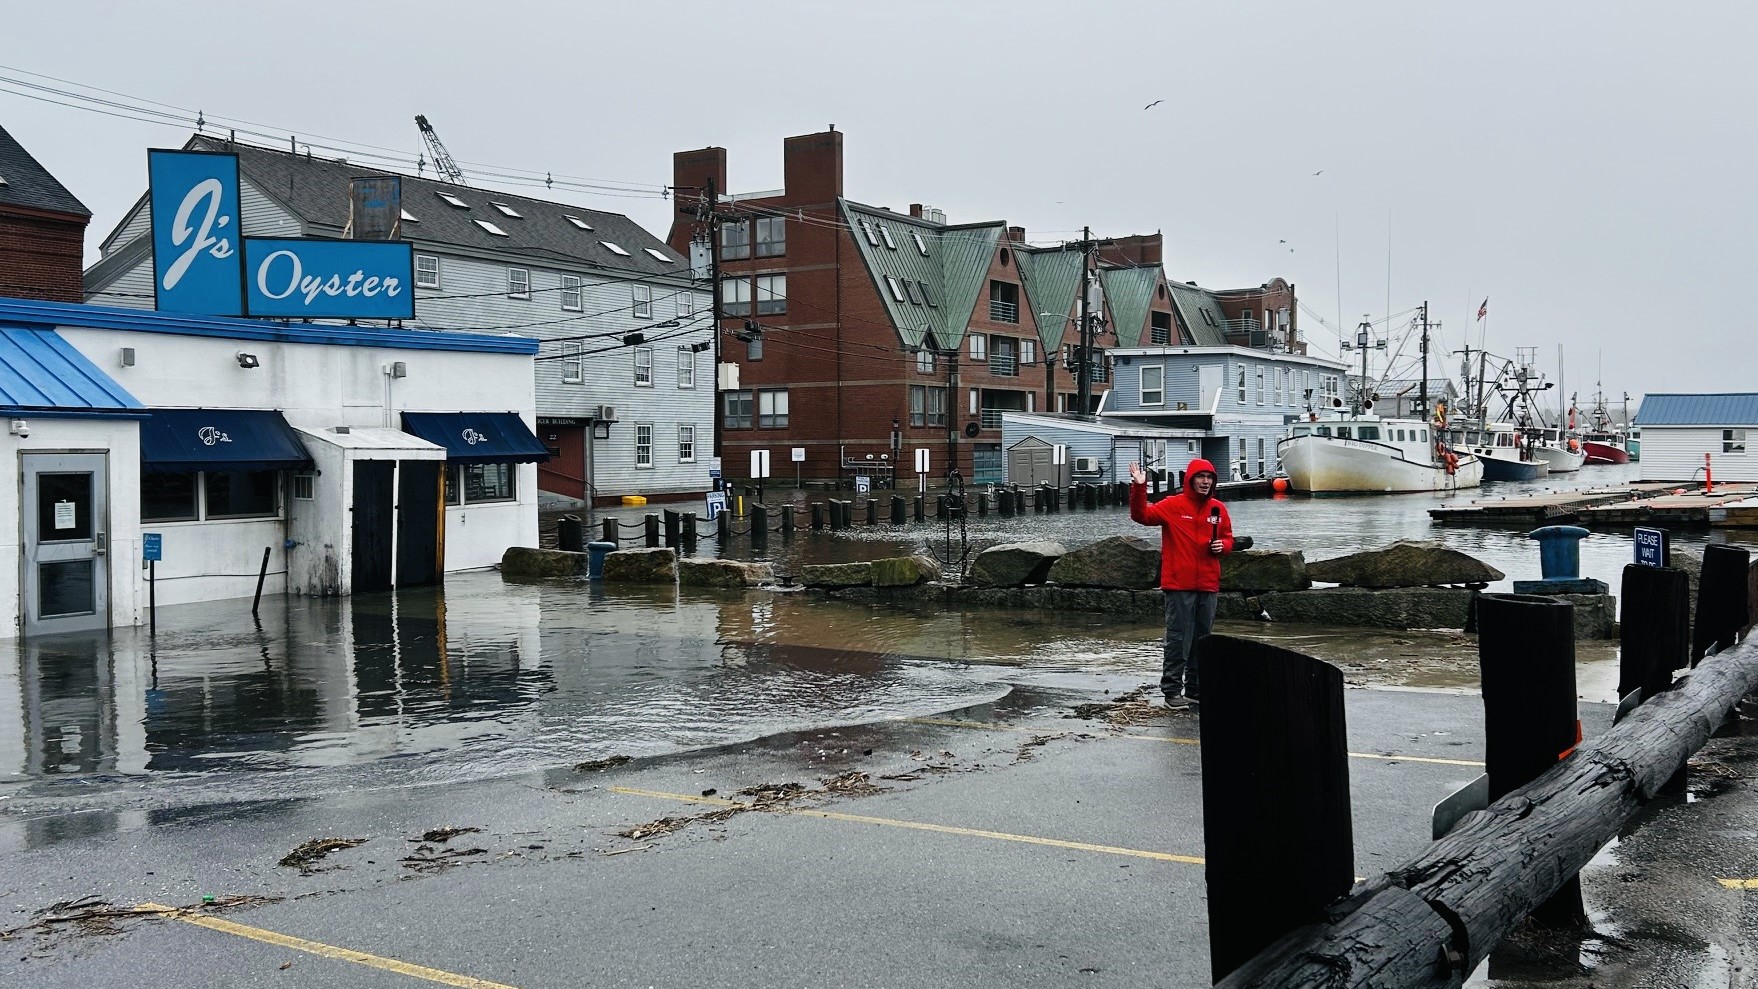 A TV news reporter records a segment in the parking lot of J's Oyster as part of the station's coverage of flooding in Portland.